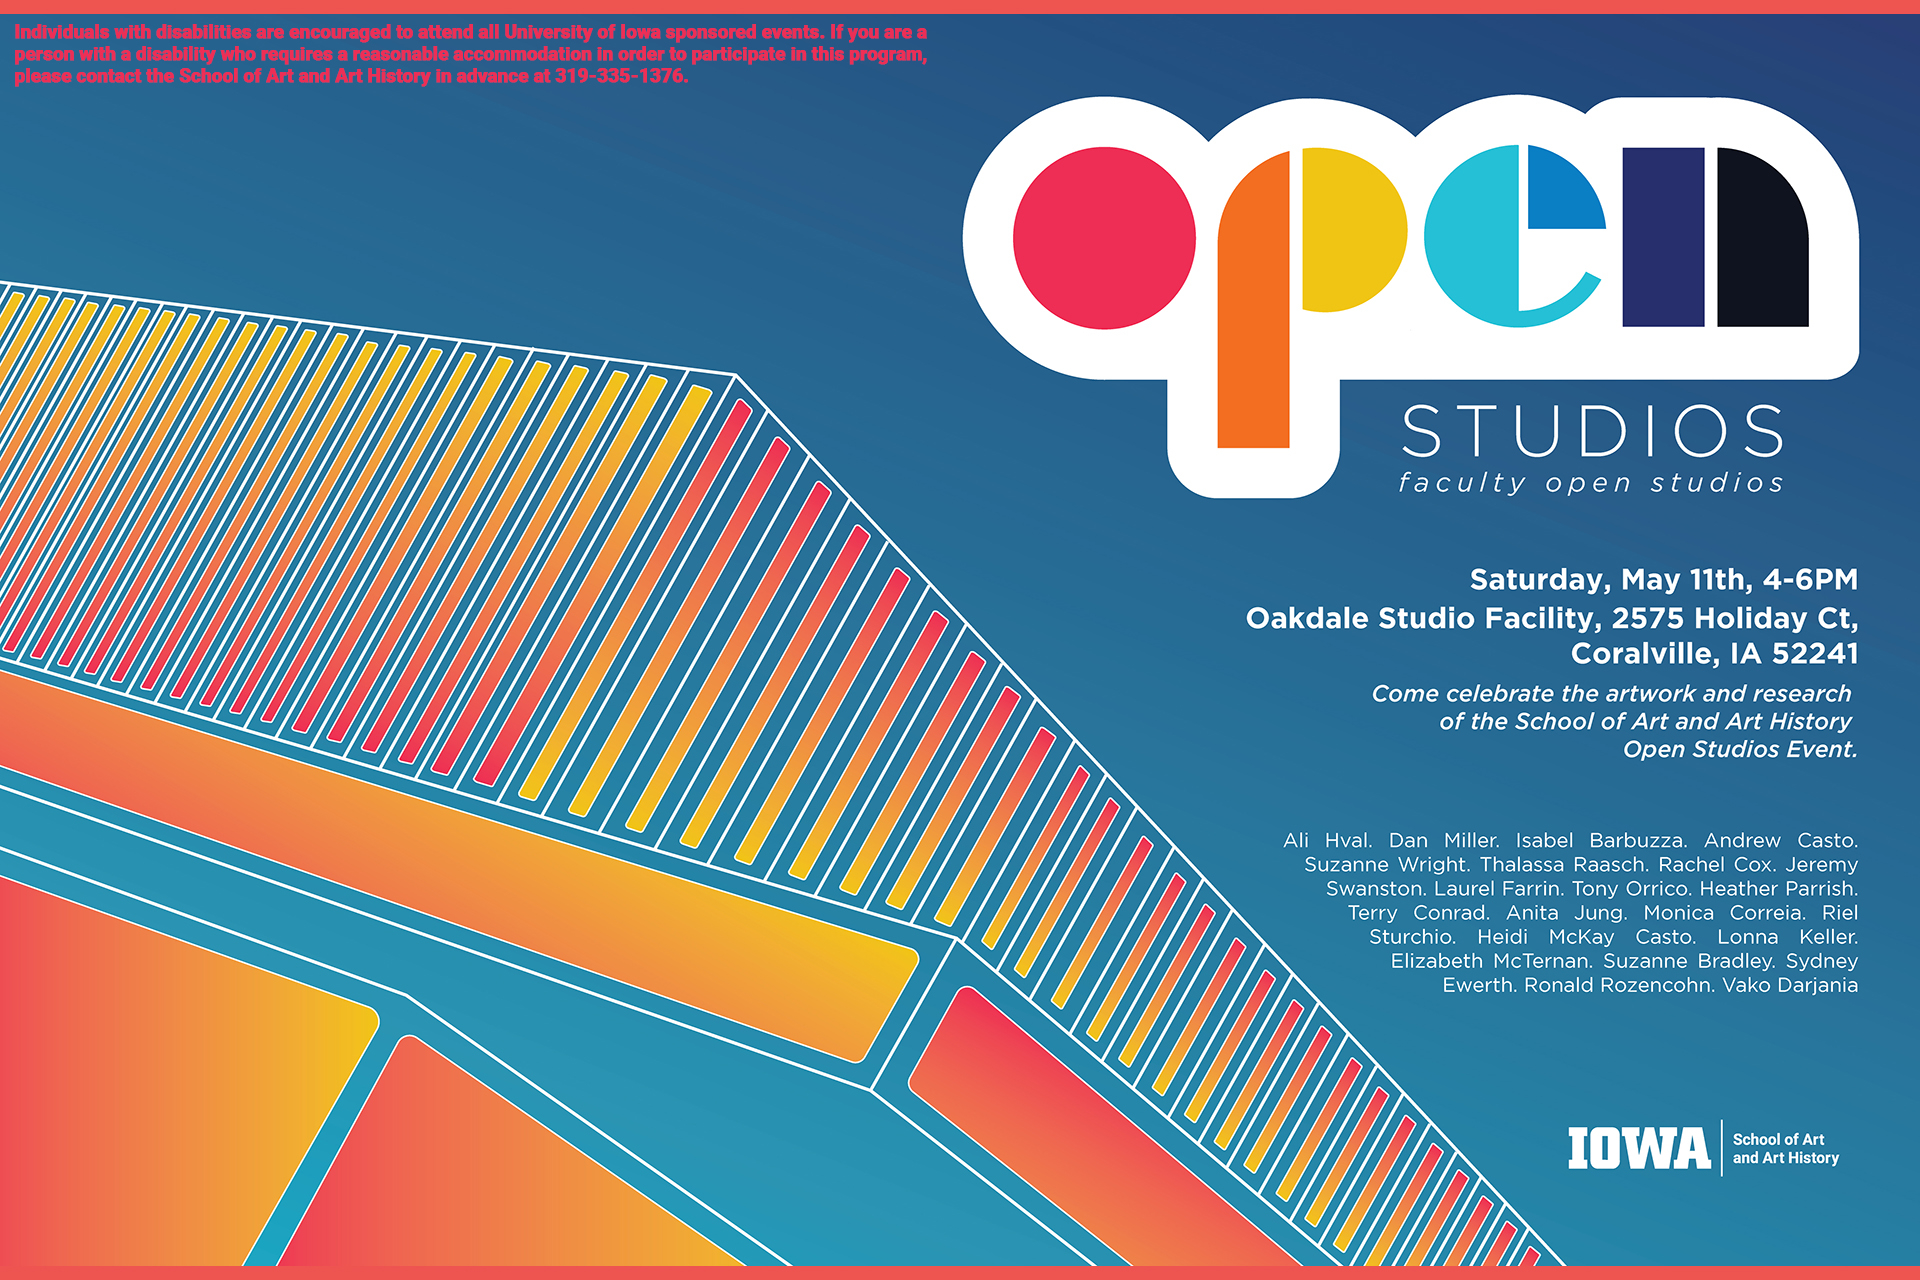 Open Studios faculty open studios Saturday May 11th 4-6PM Oakdale Studio Facility 2575 Holiday Ct Coralville IA come celebrate the artwork and research of the school of art and art history Open Studios Event